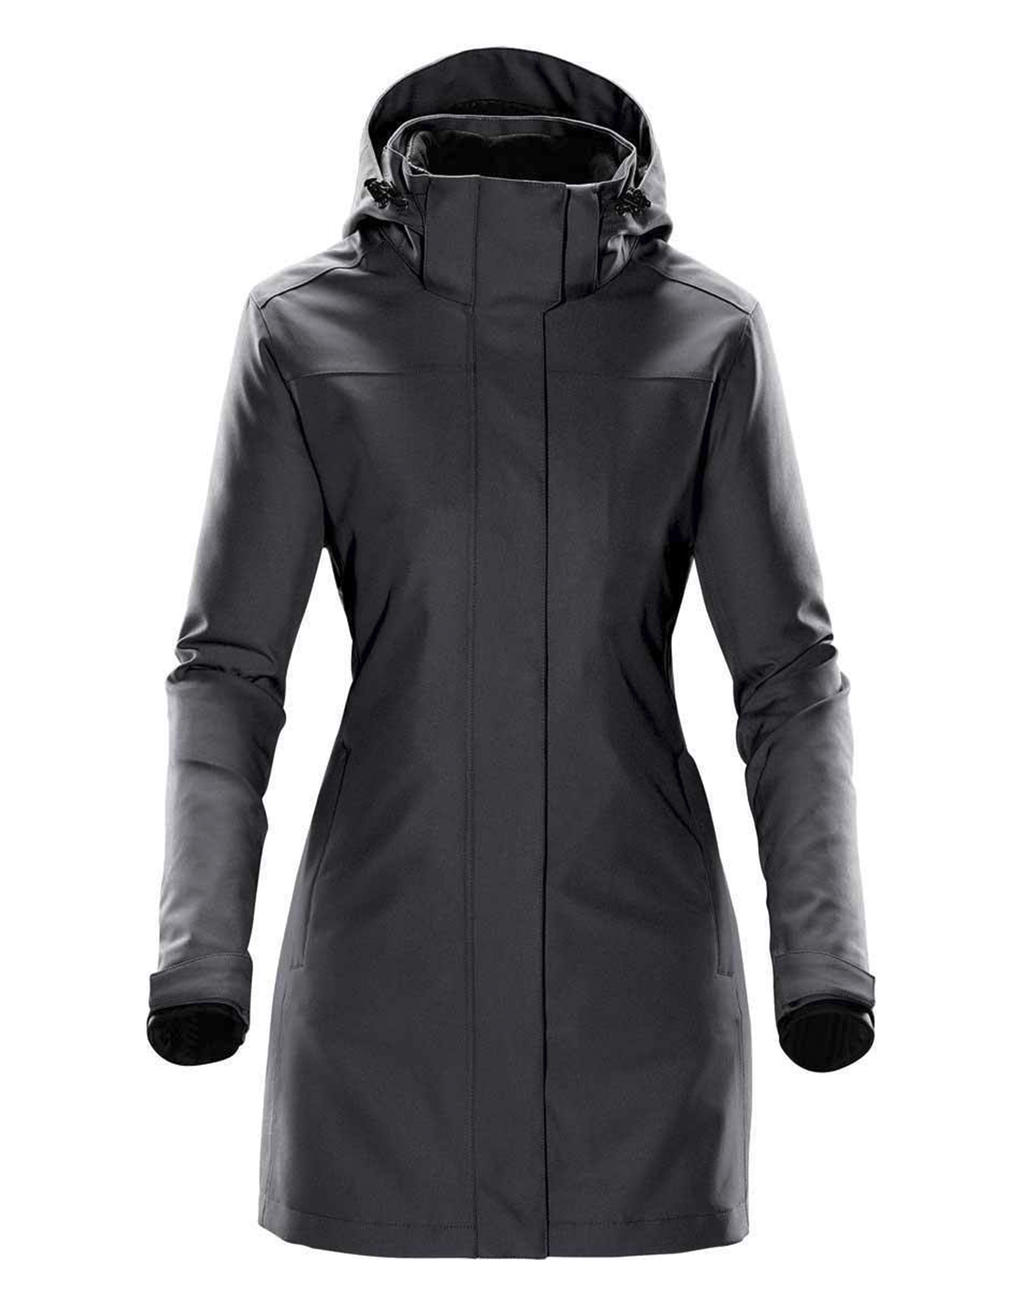  Womens Avalanche System Jacket in Farbe Black